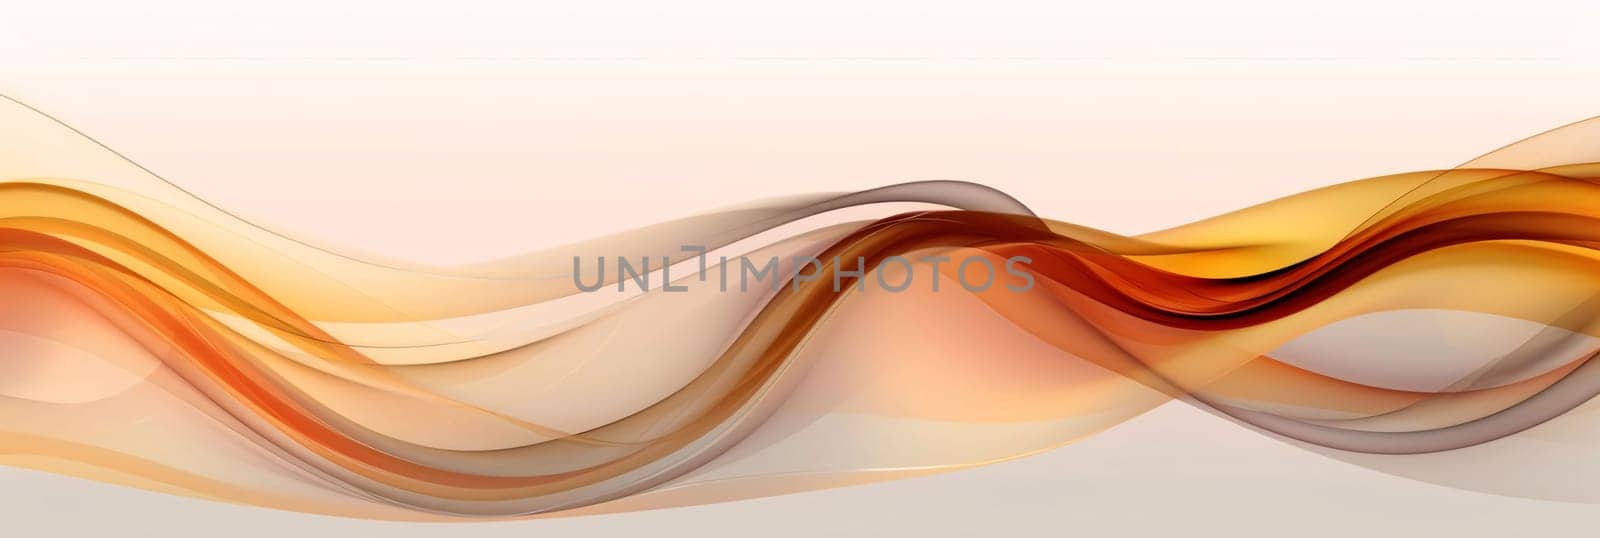 Abstract background, orange 3d rendered waved lines for brochure, website, flyer design. by ThemesS